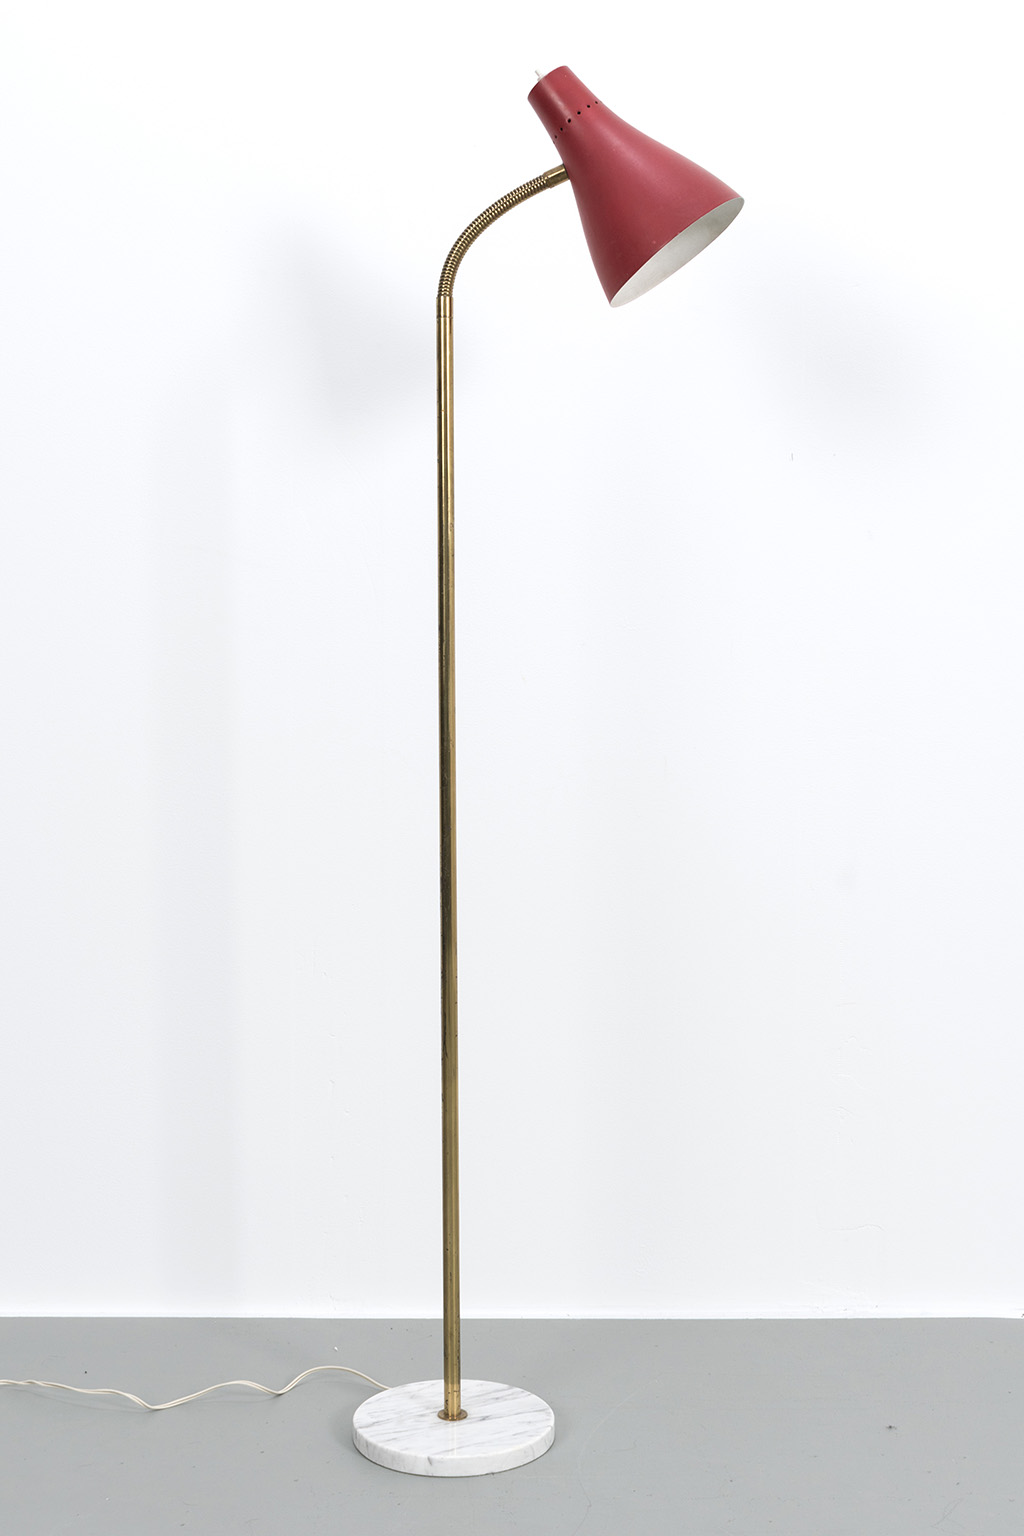 Reading lamp with a metal lamp-shade